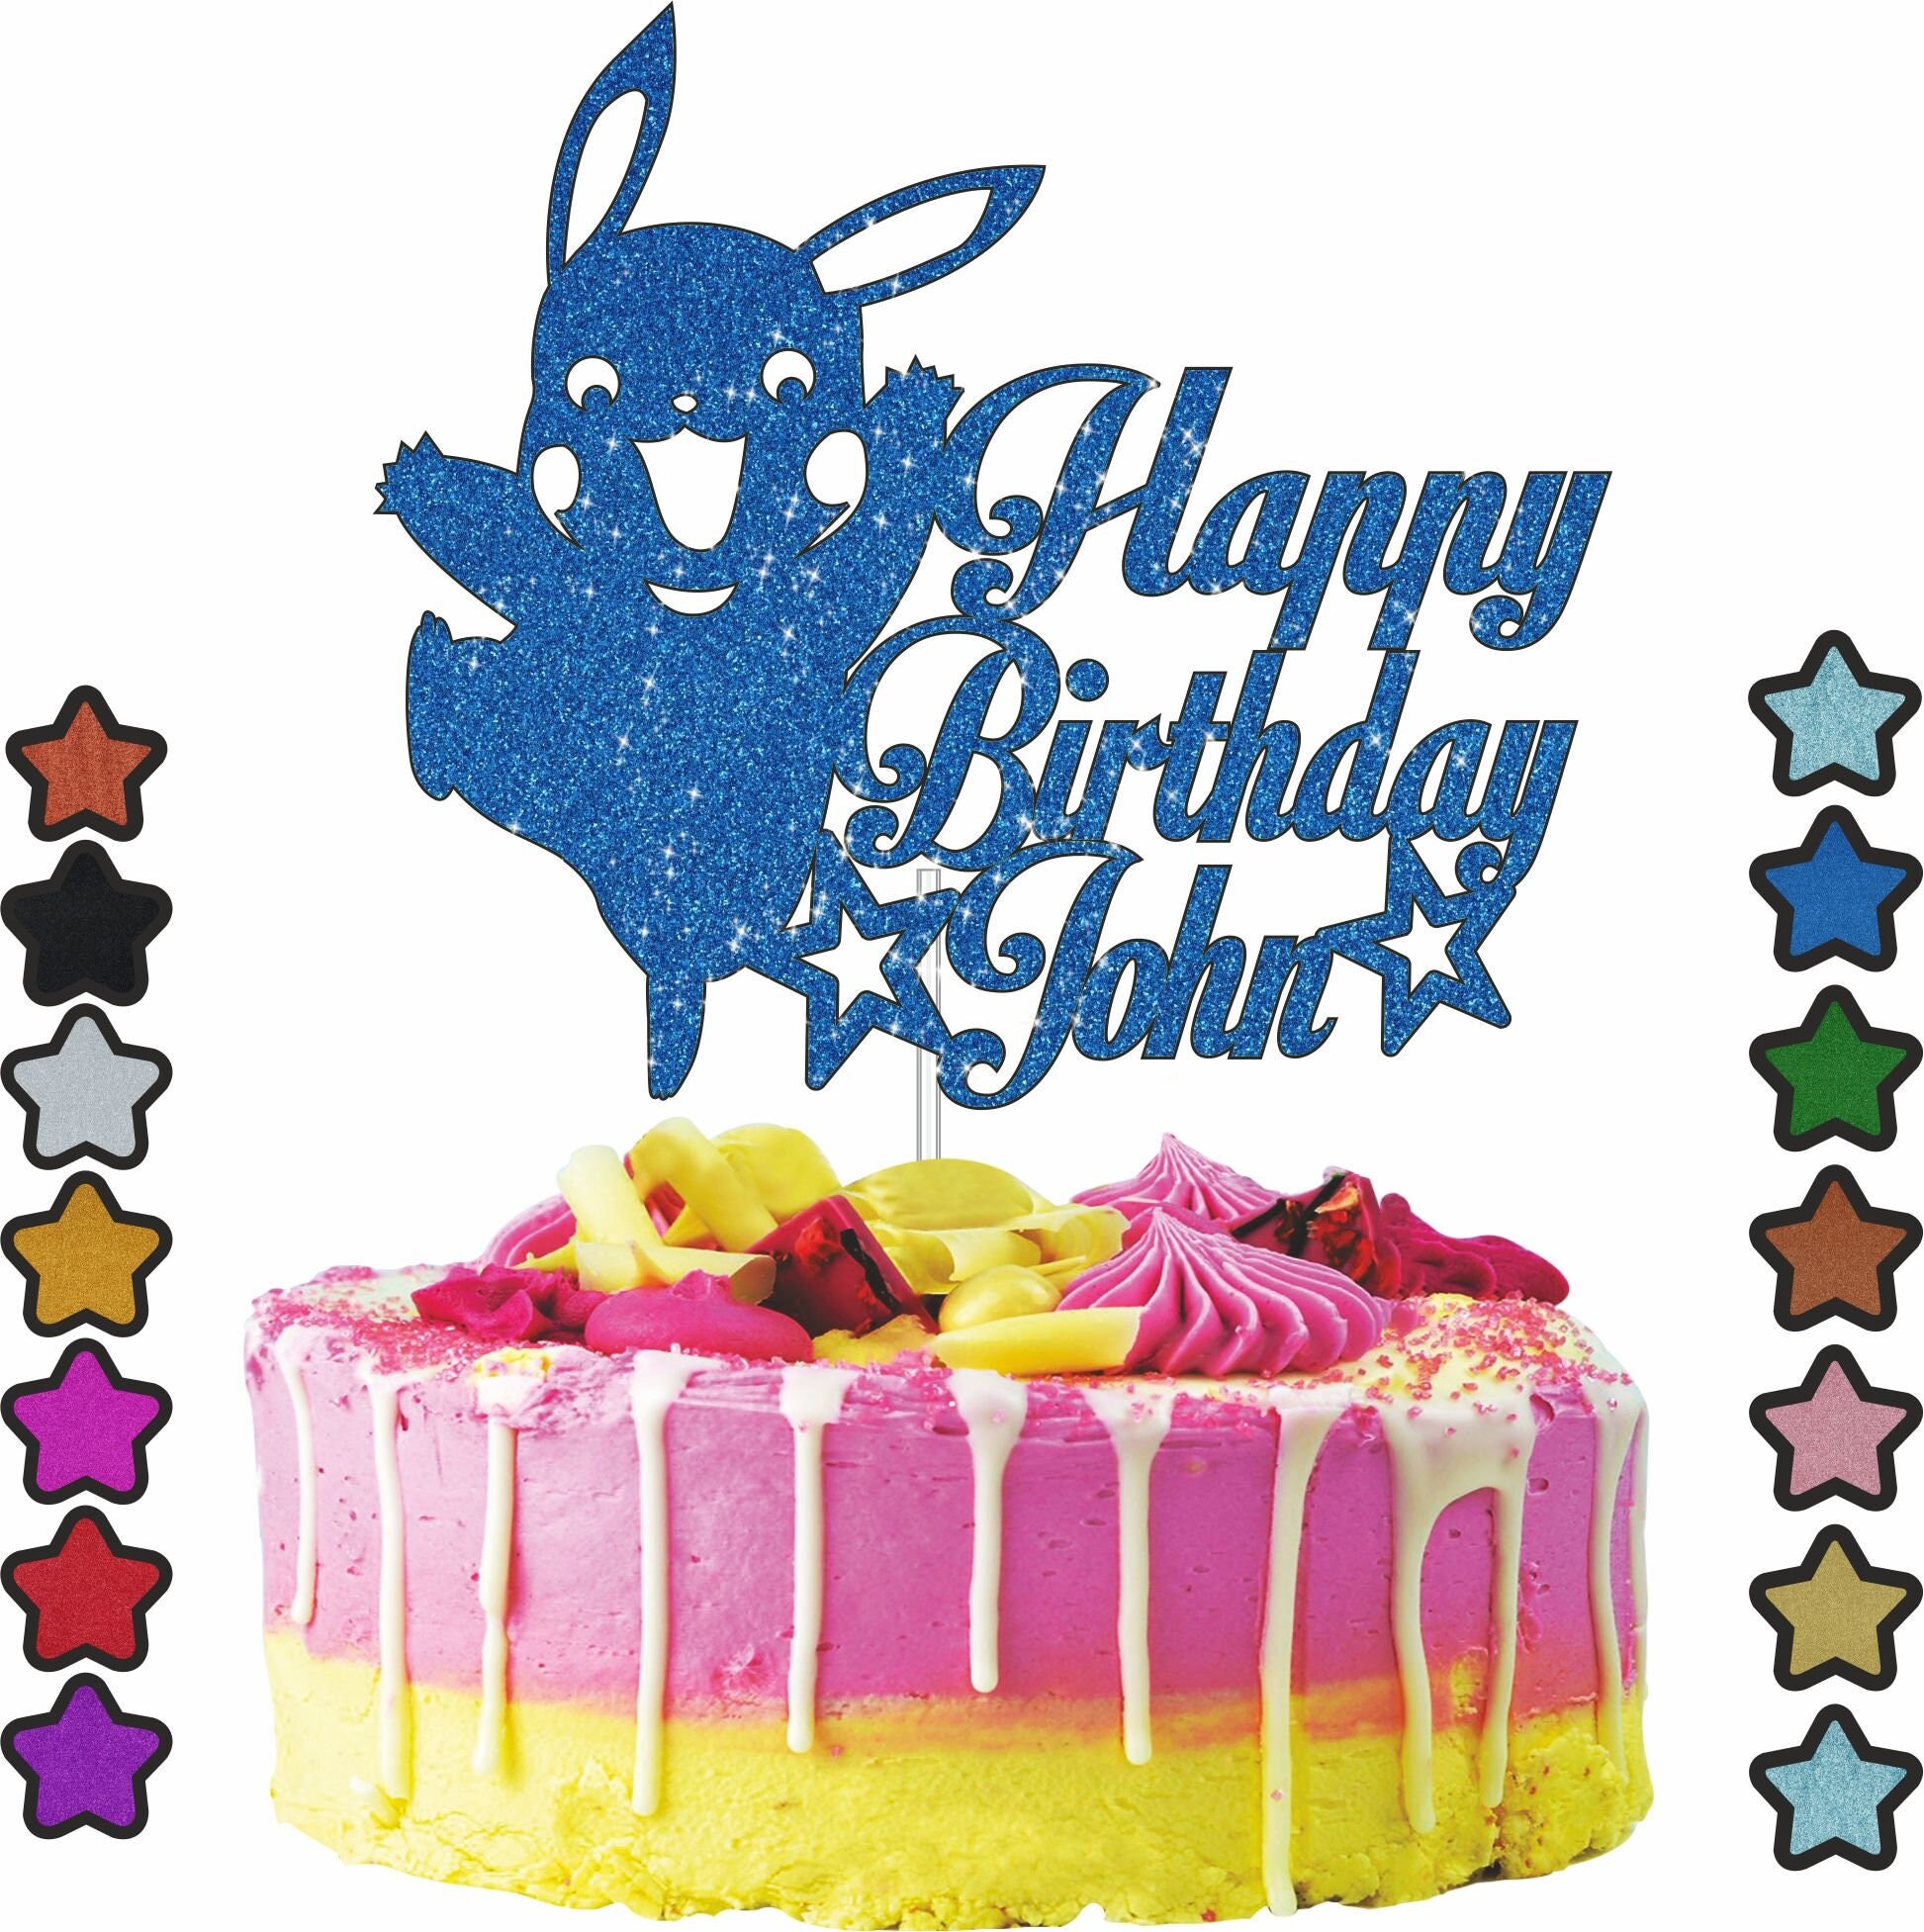 Pikachu Birthday Cupcake Topper Set Featuring Pikachu and Friends Figures and Decorative Themed Accessories 